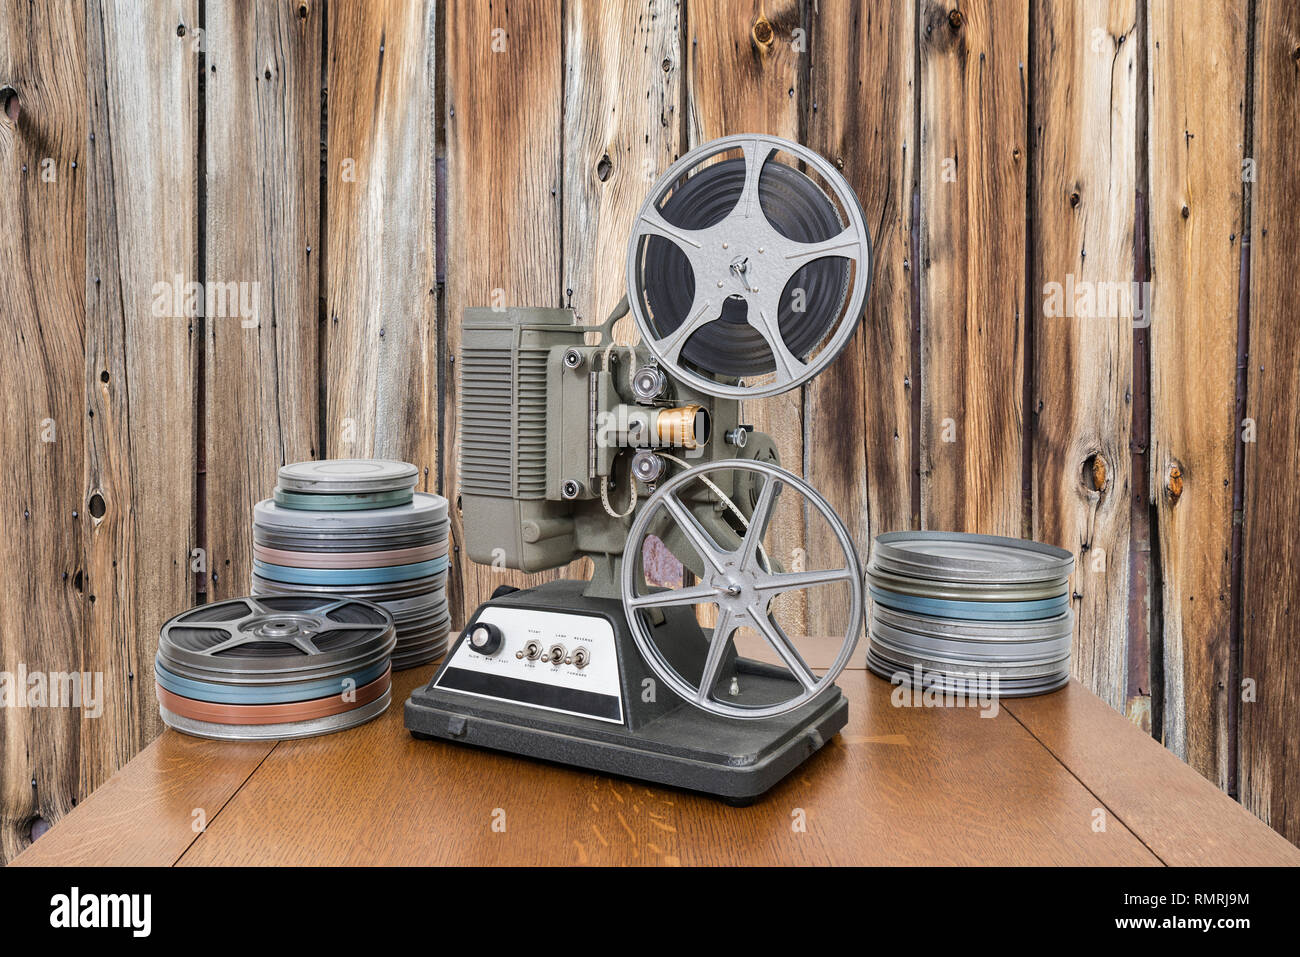 Vintage 8mm home movie projector and film cans with old wood wall Stock  Photo - Alamy